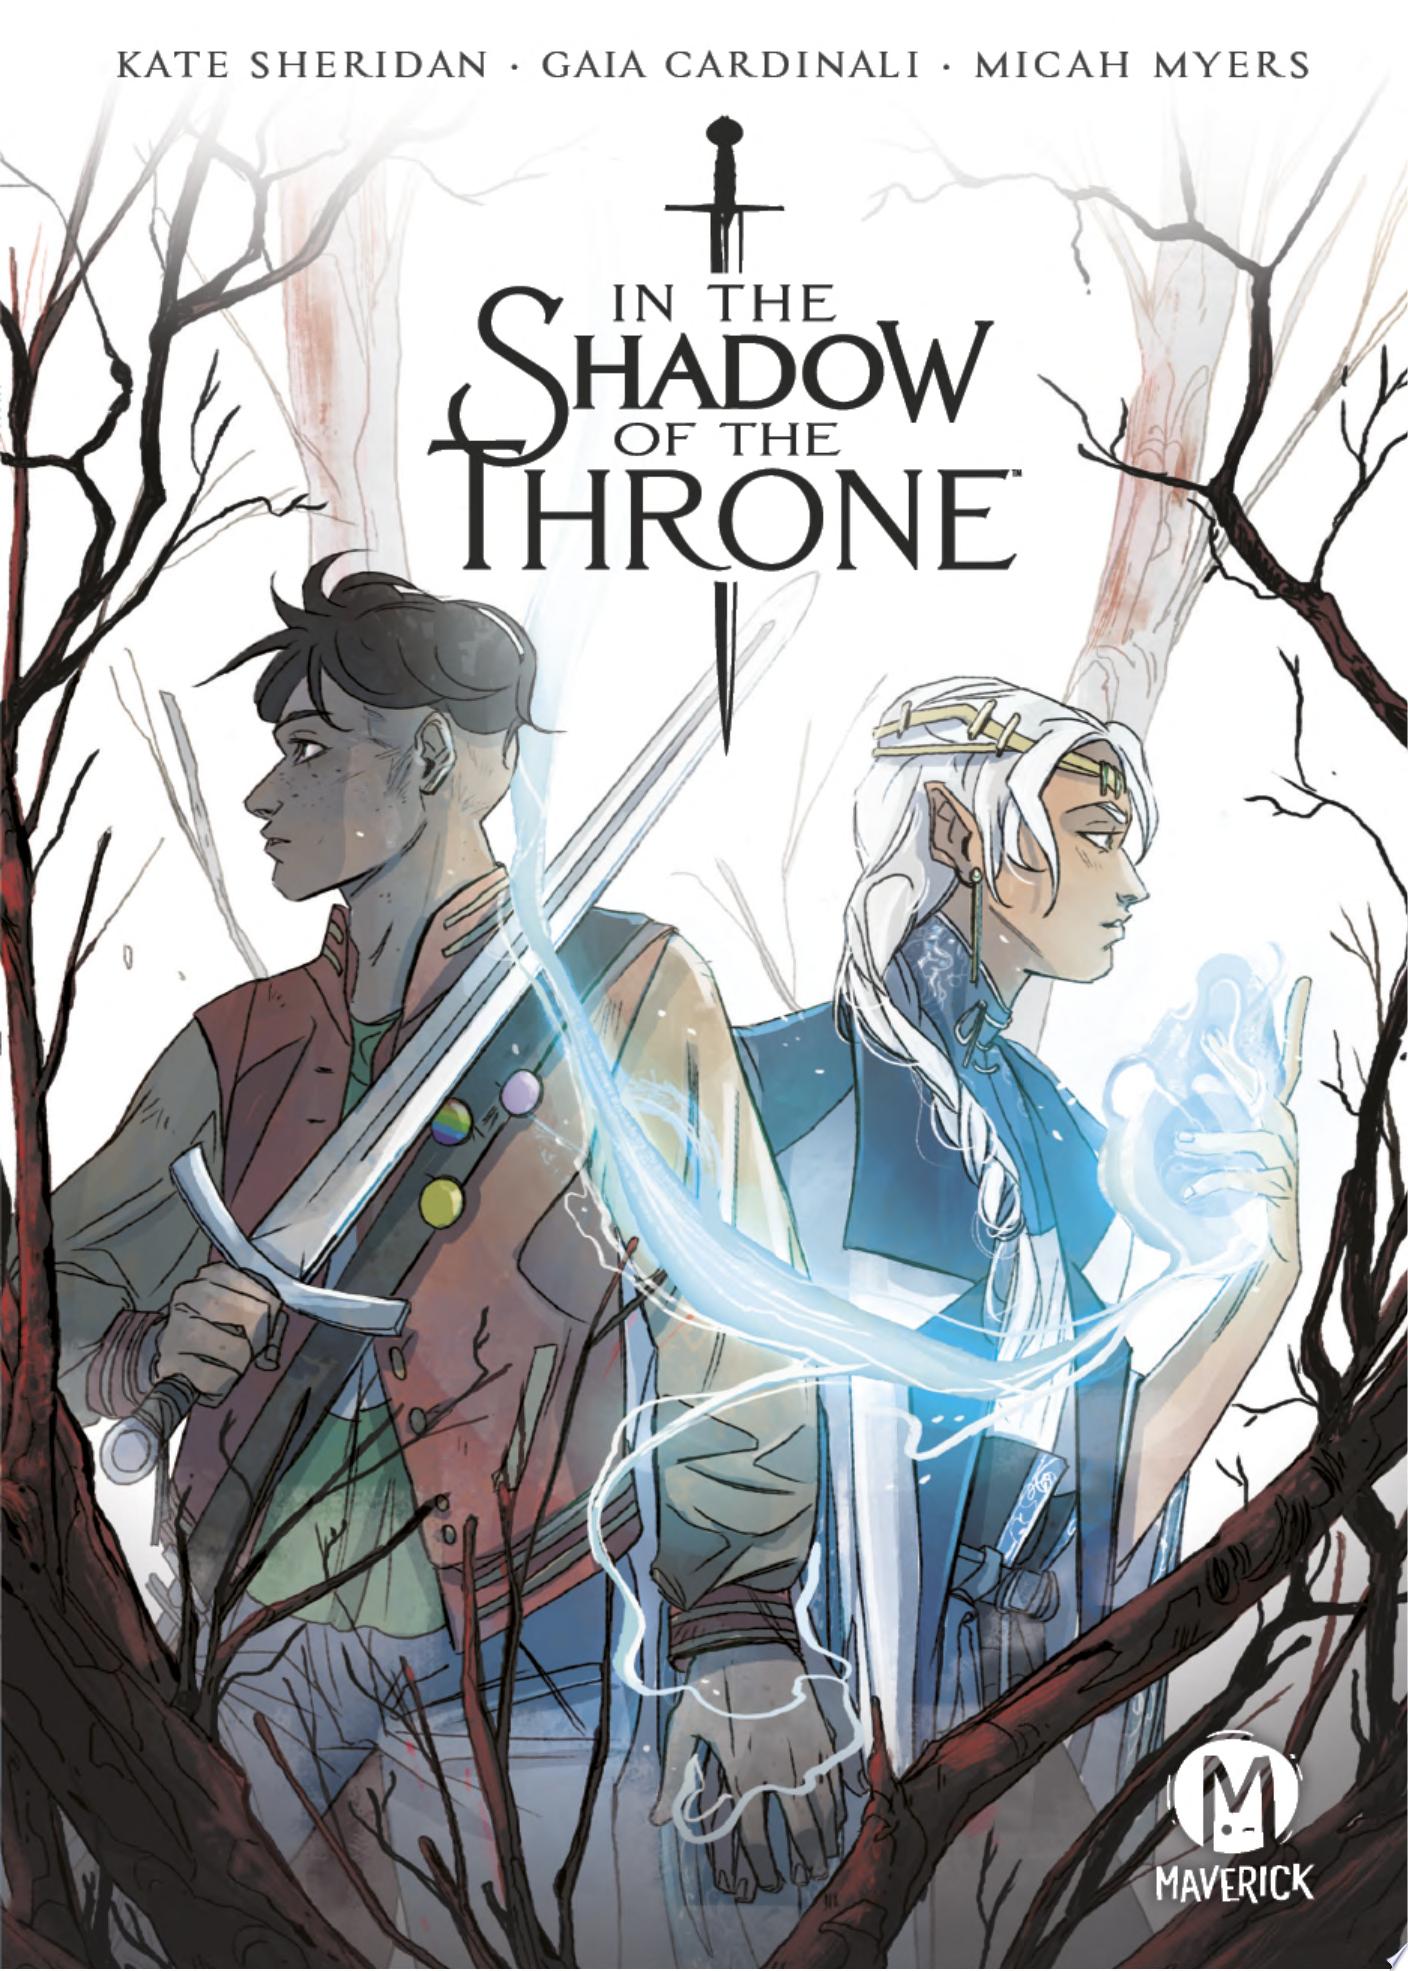 Image for "In The Shadow Of The Throne"